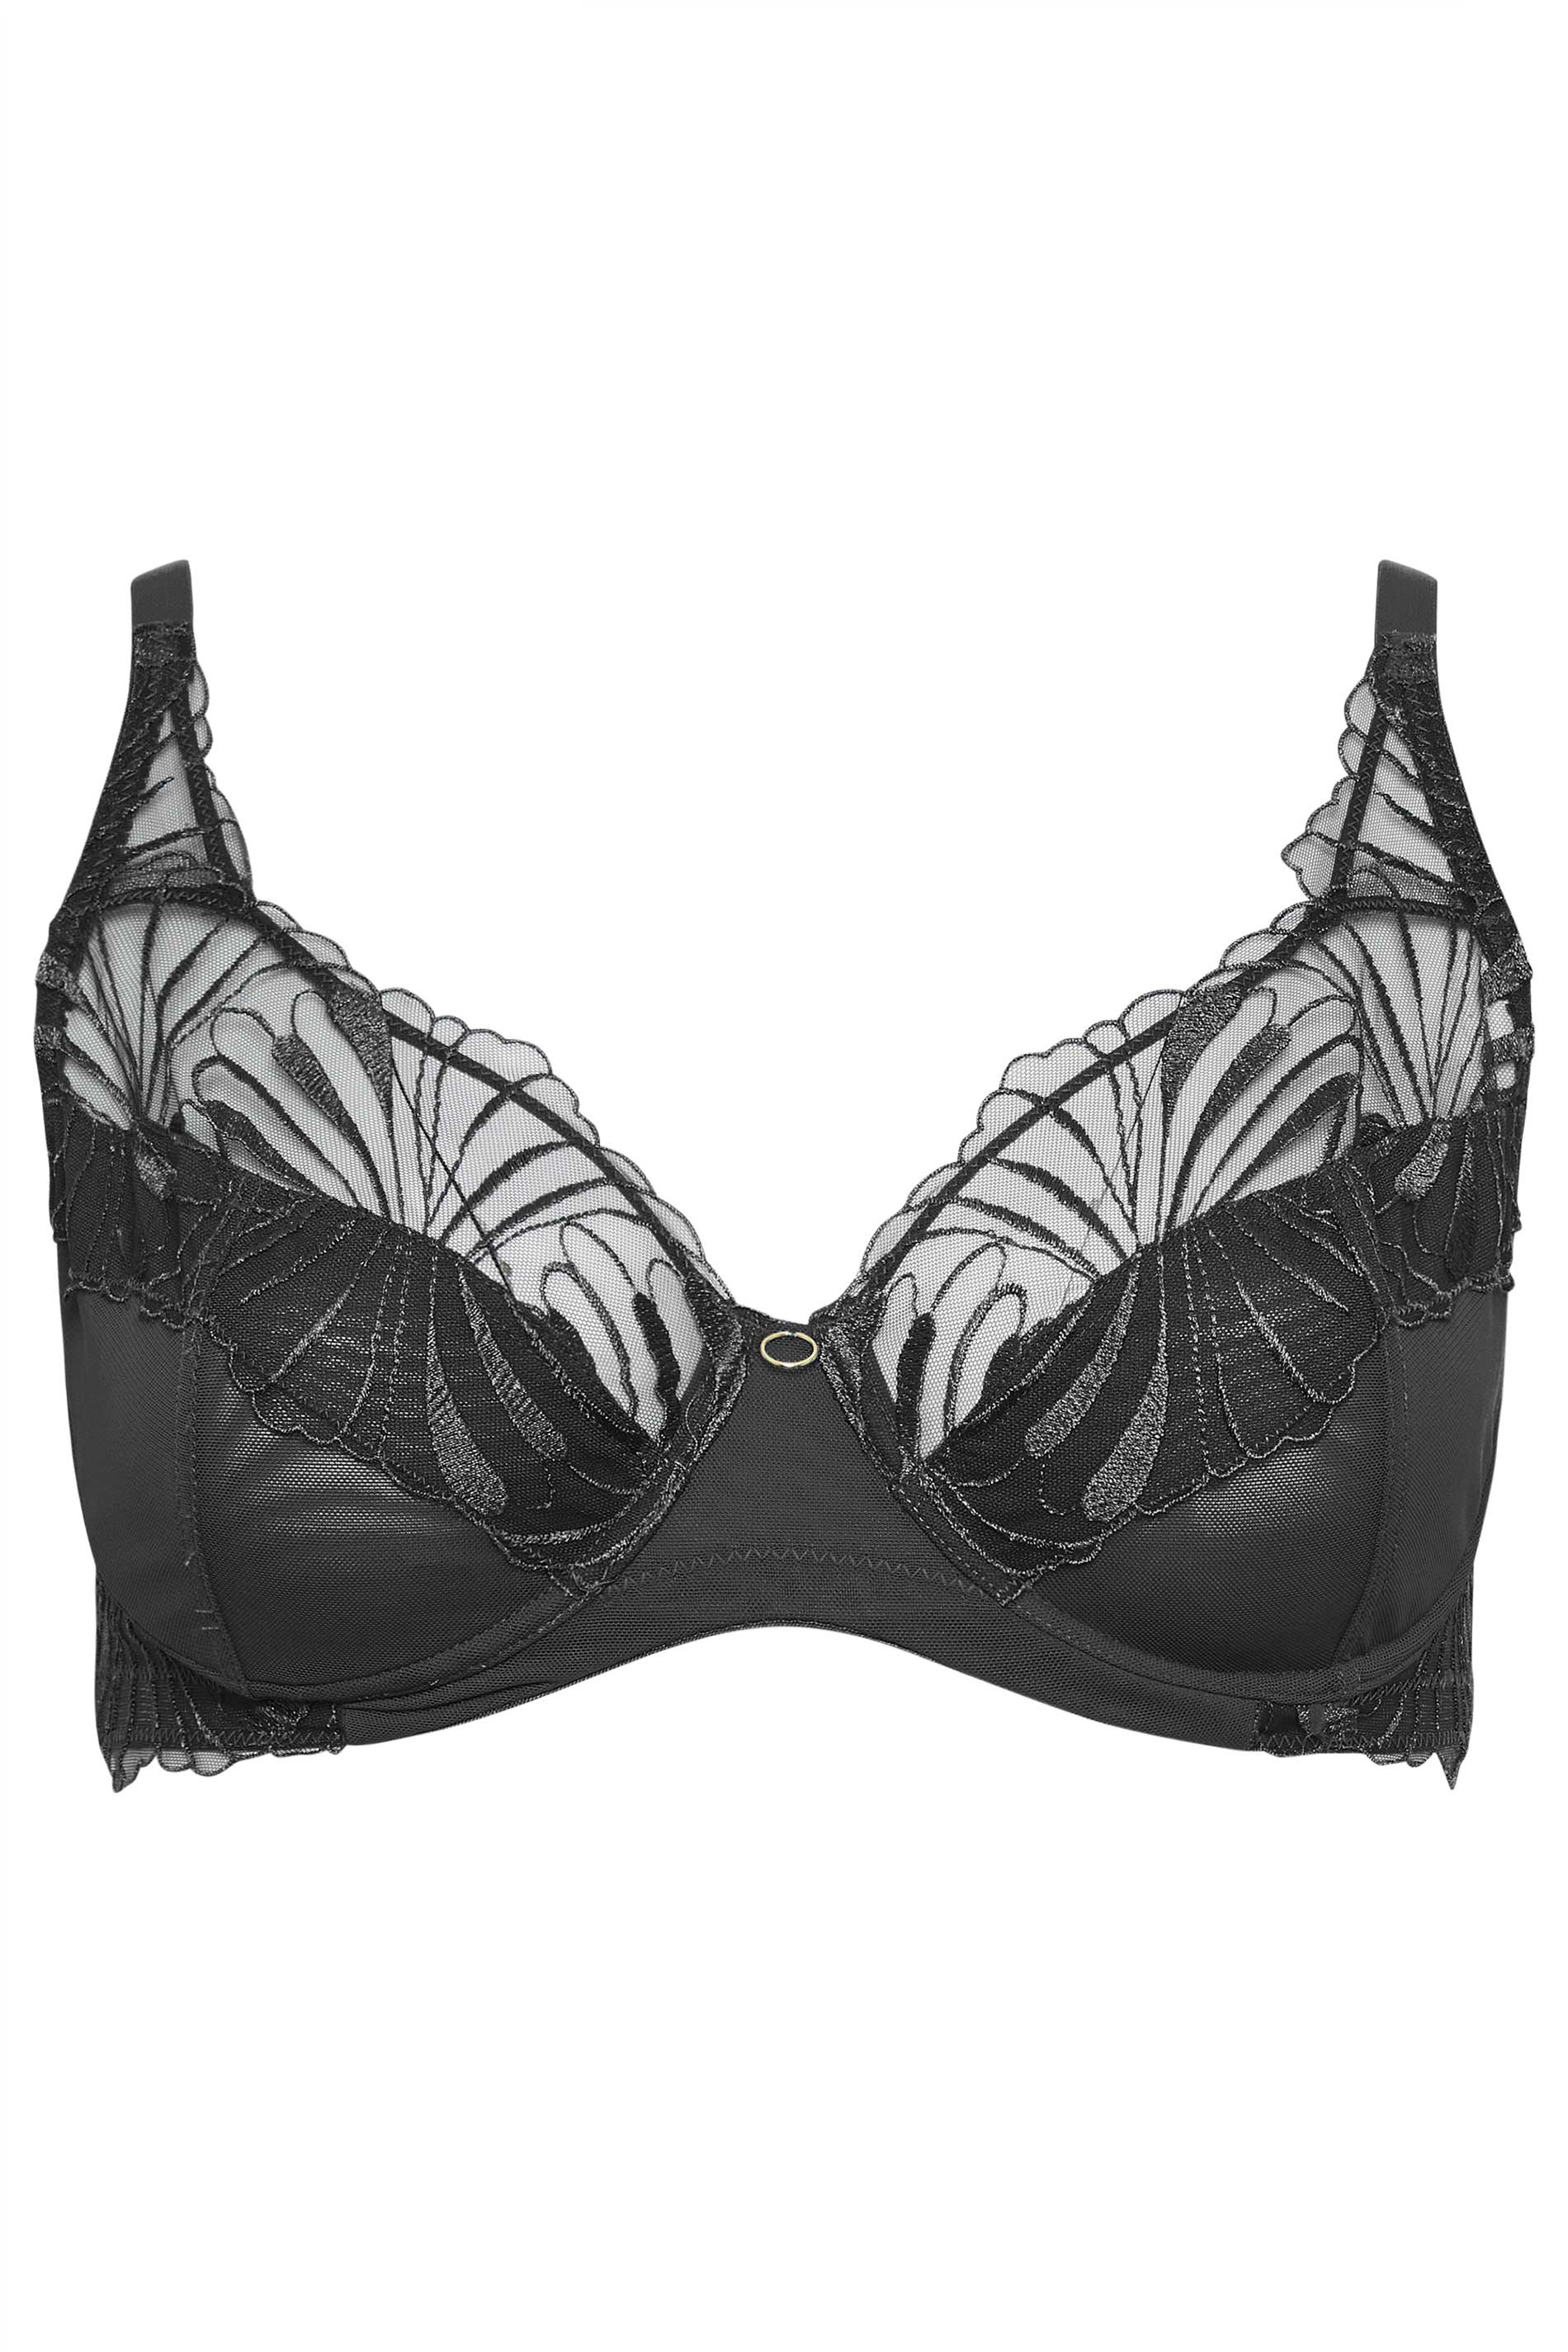 Buy Ex Marks and Spencer Bra Black Autograph BALCONY Padded Lace